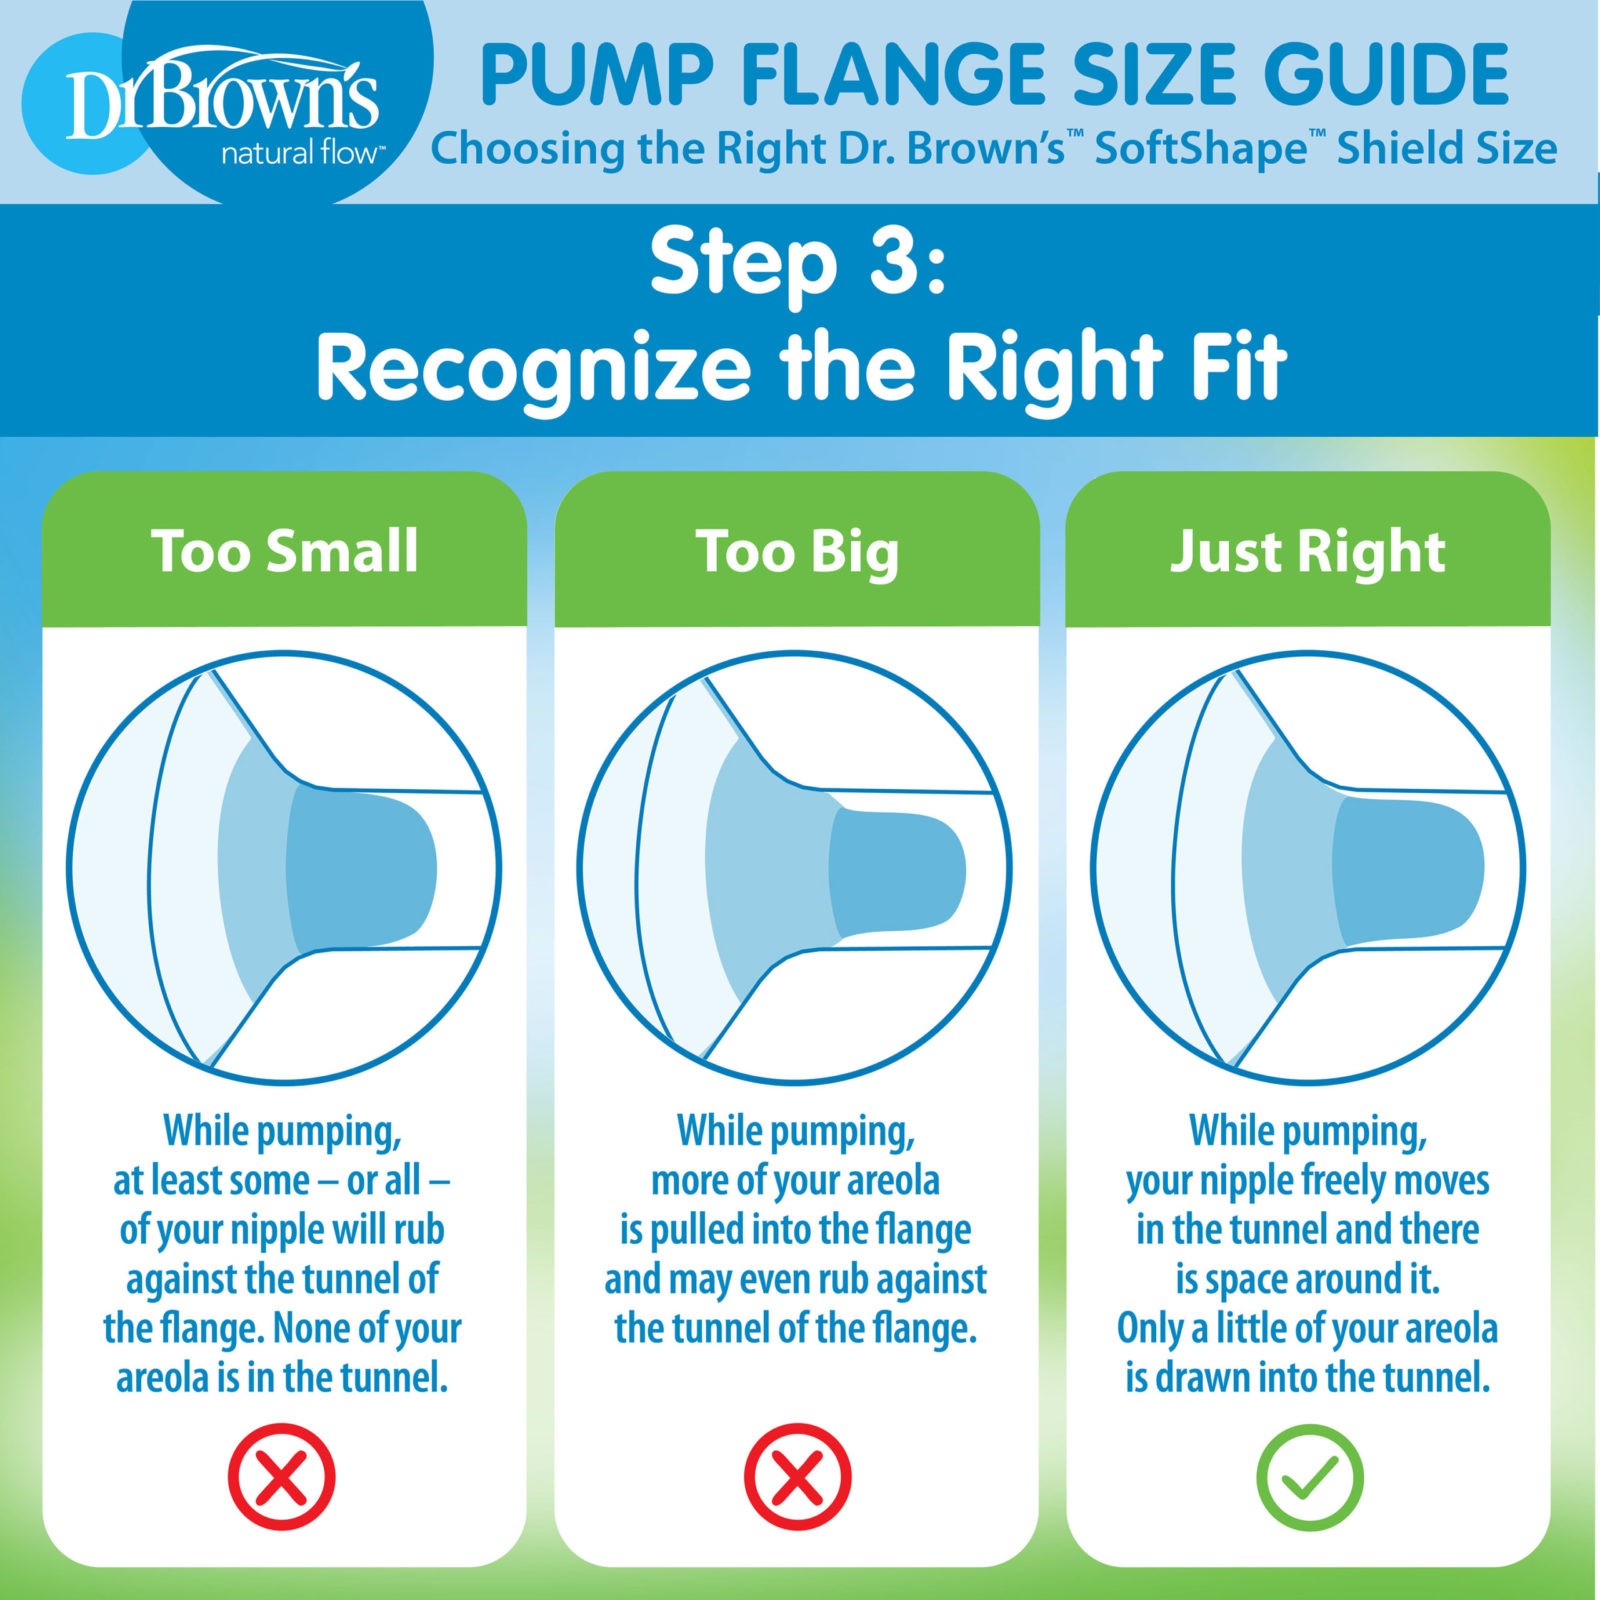 Choosing the right breast pump is an important step in your